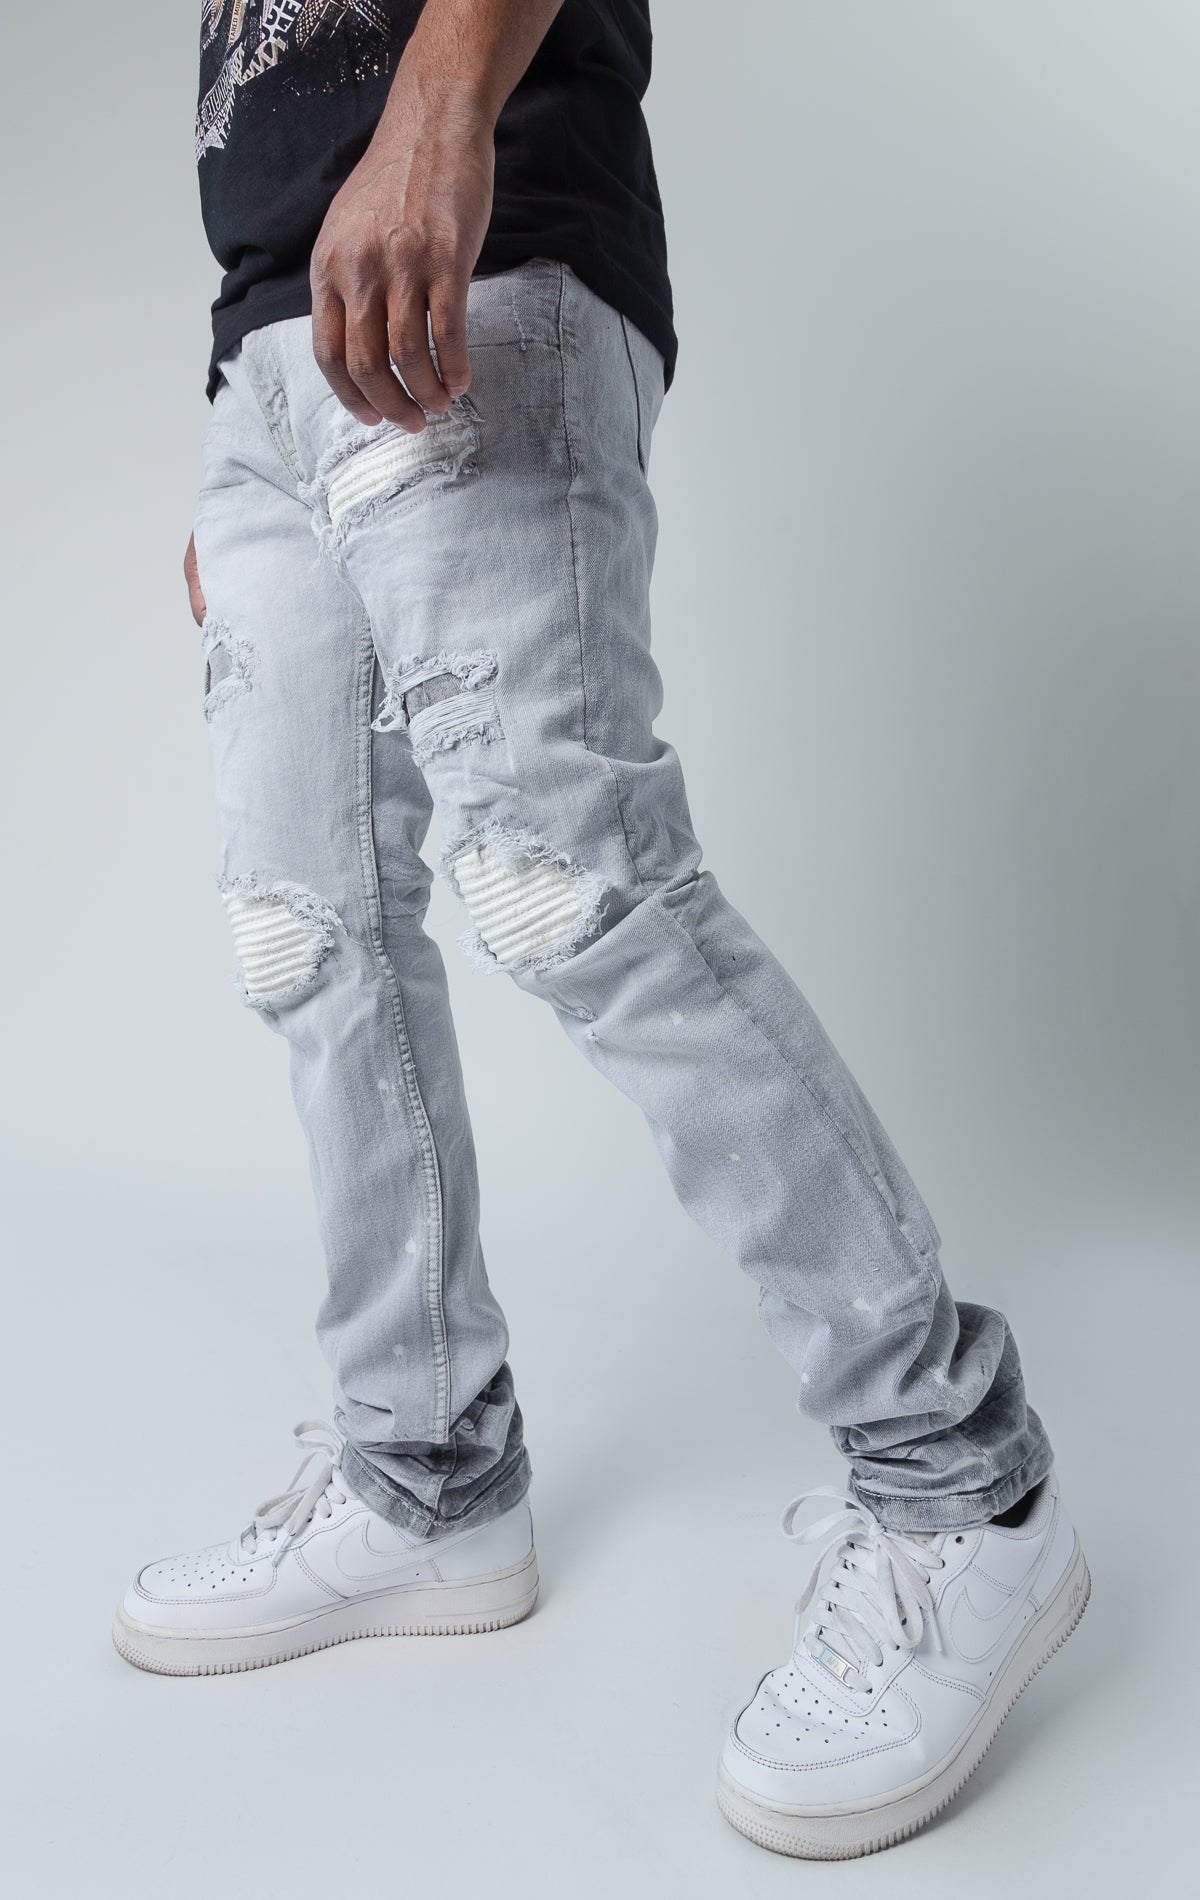 Evolution teared denim pants in grey and white